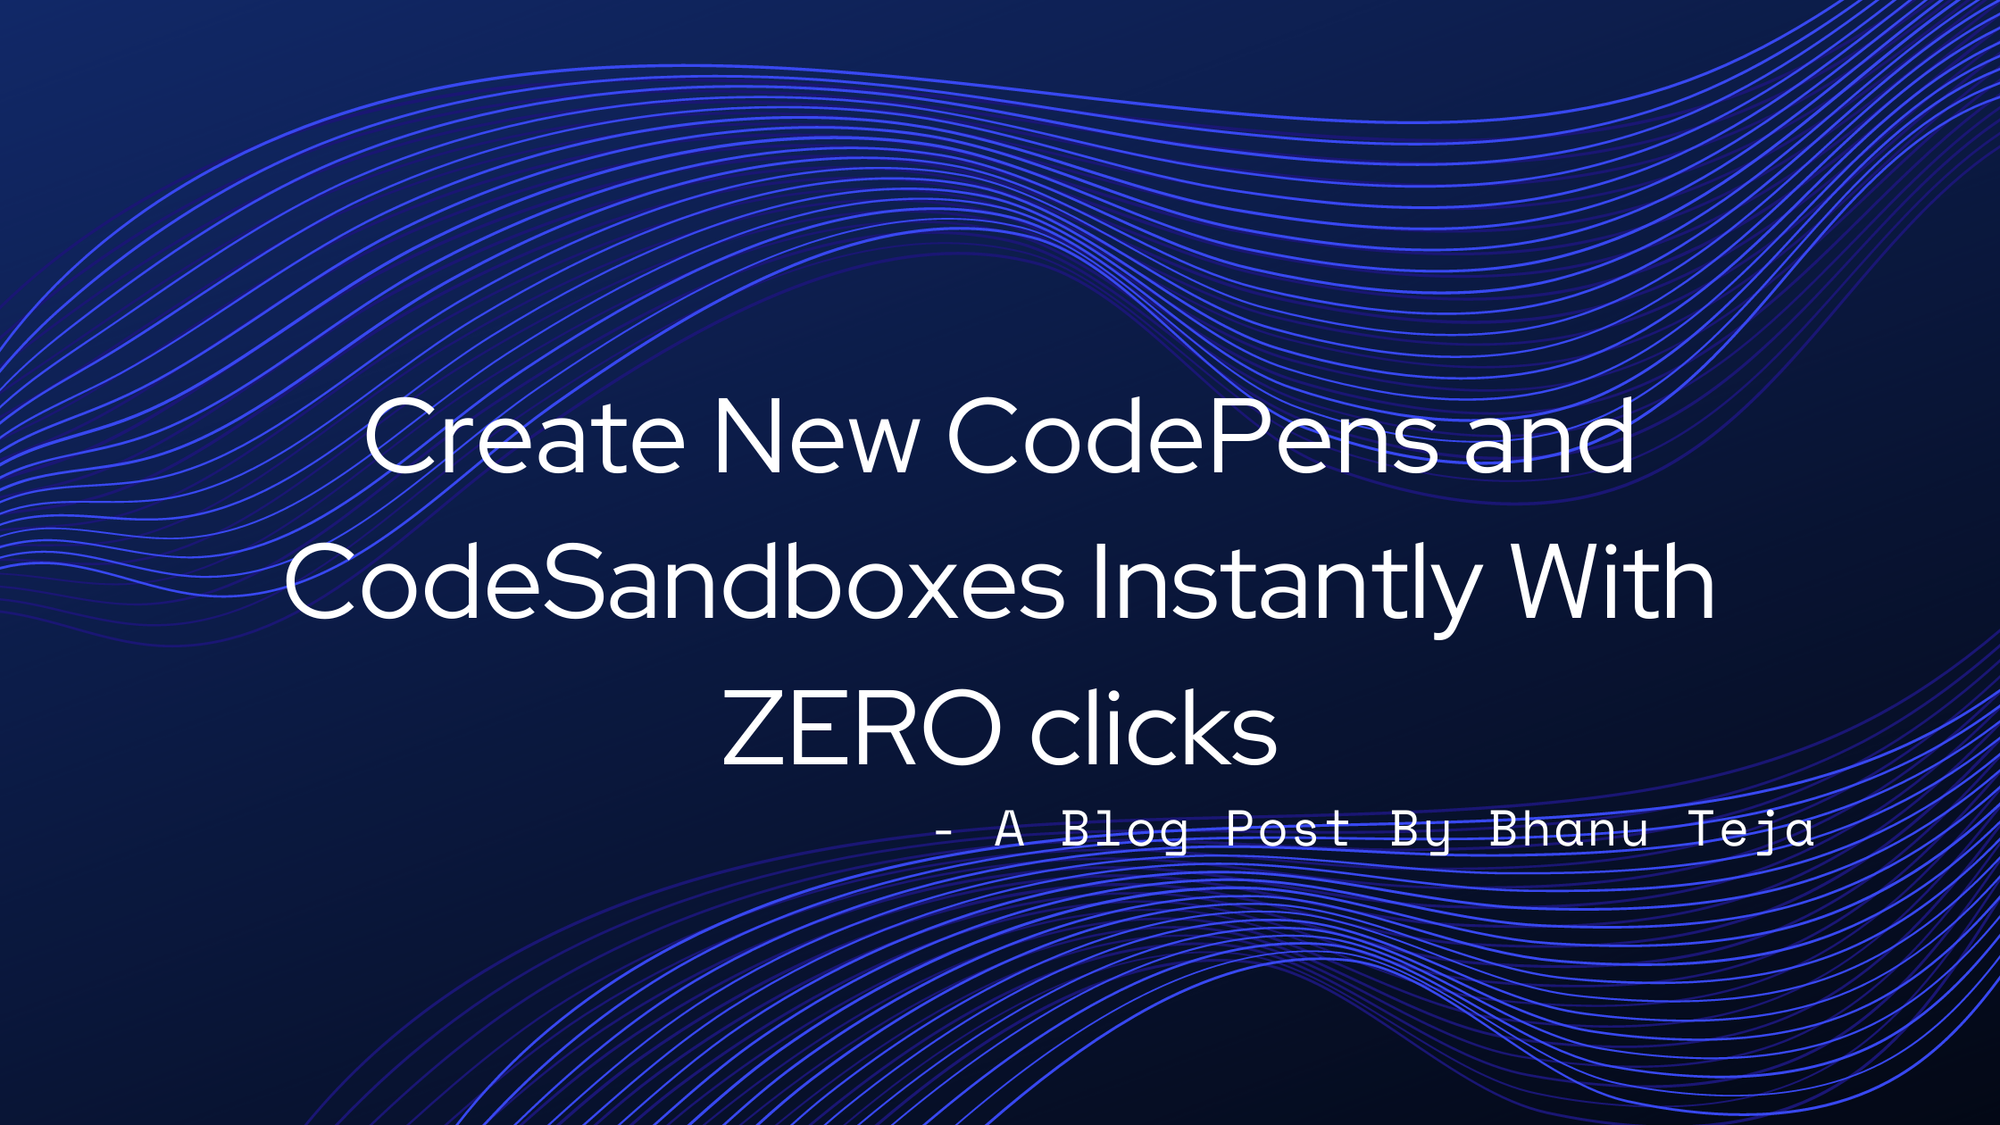 Create New CodePens and CodeSandboxes Instantly With ZERO clicks